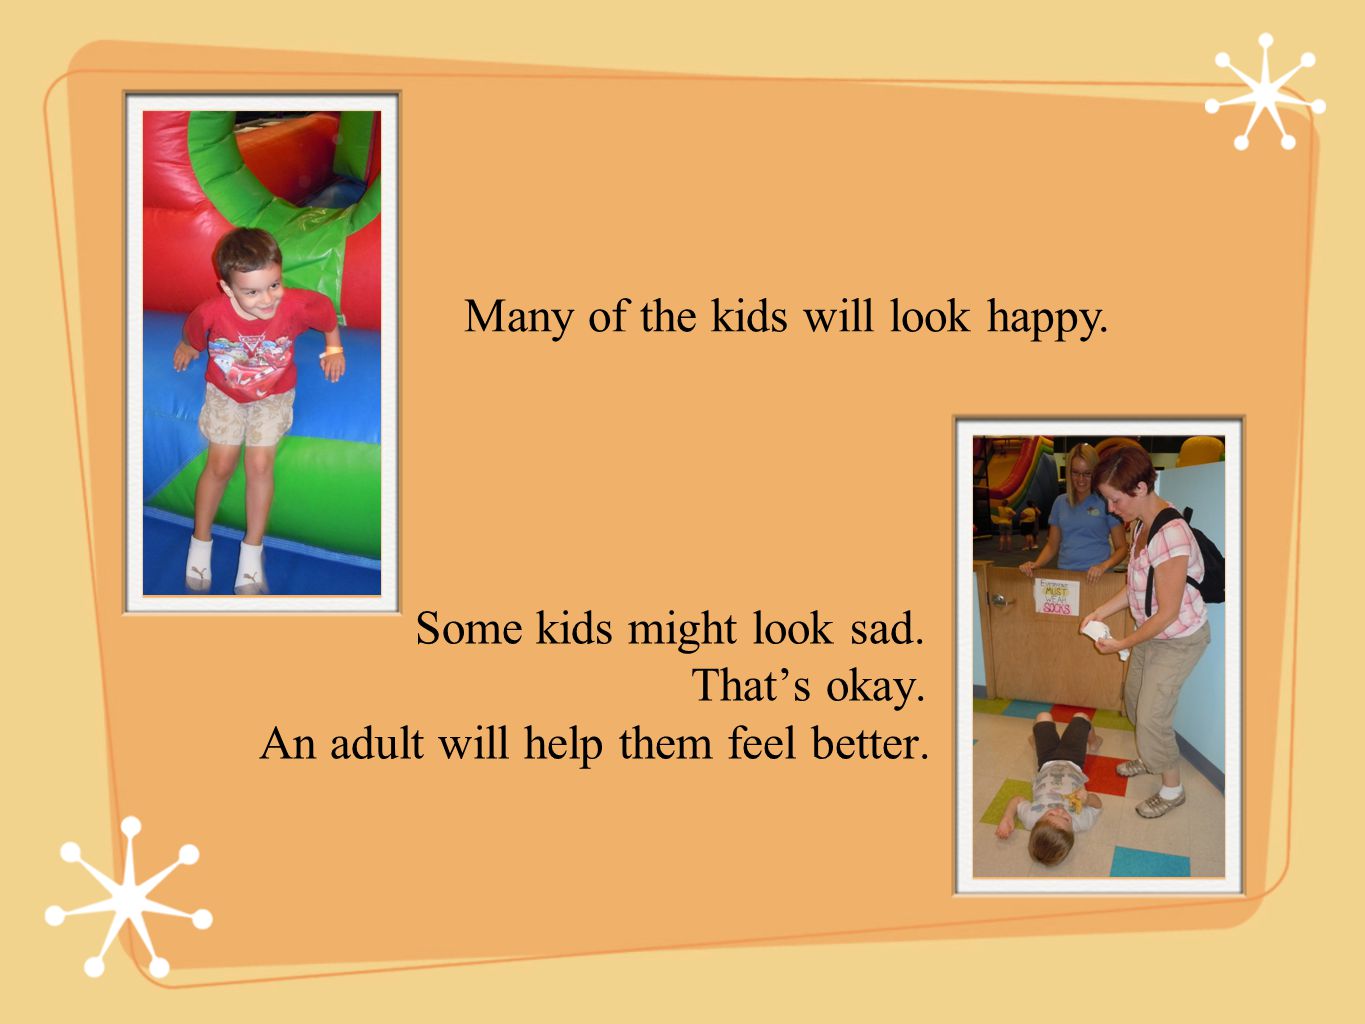 Some kids might look sad. Thats okay. An adult will help them feel better.